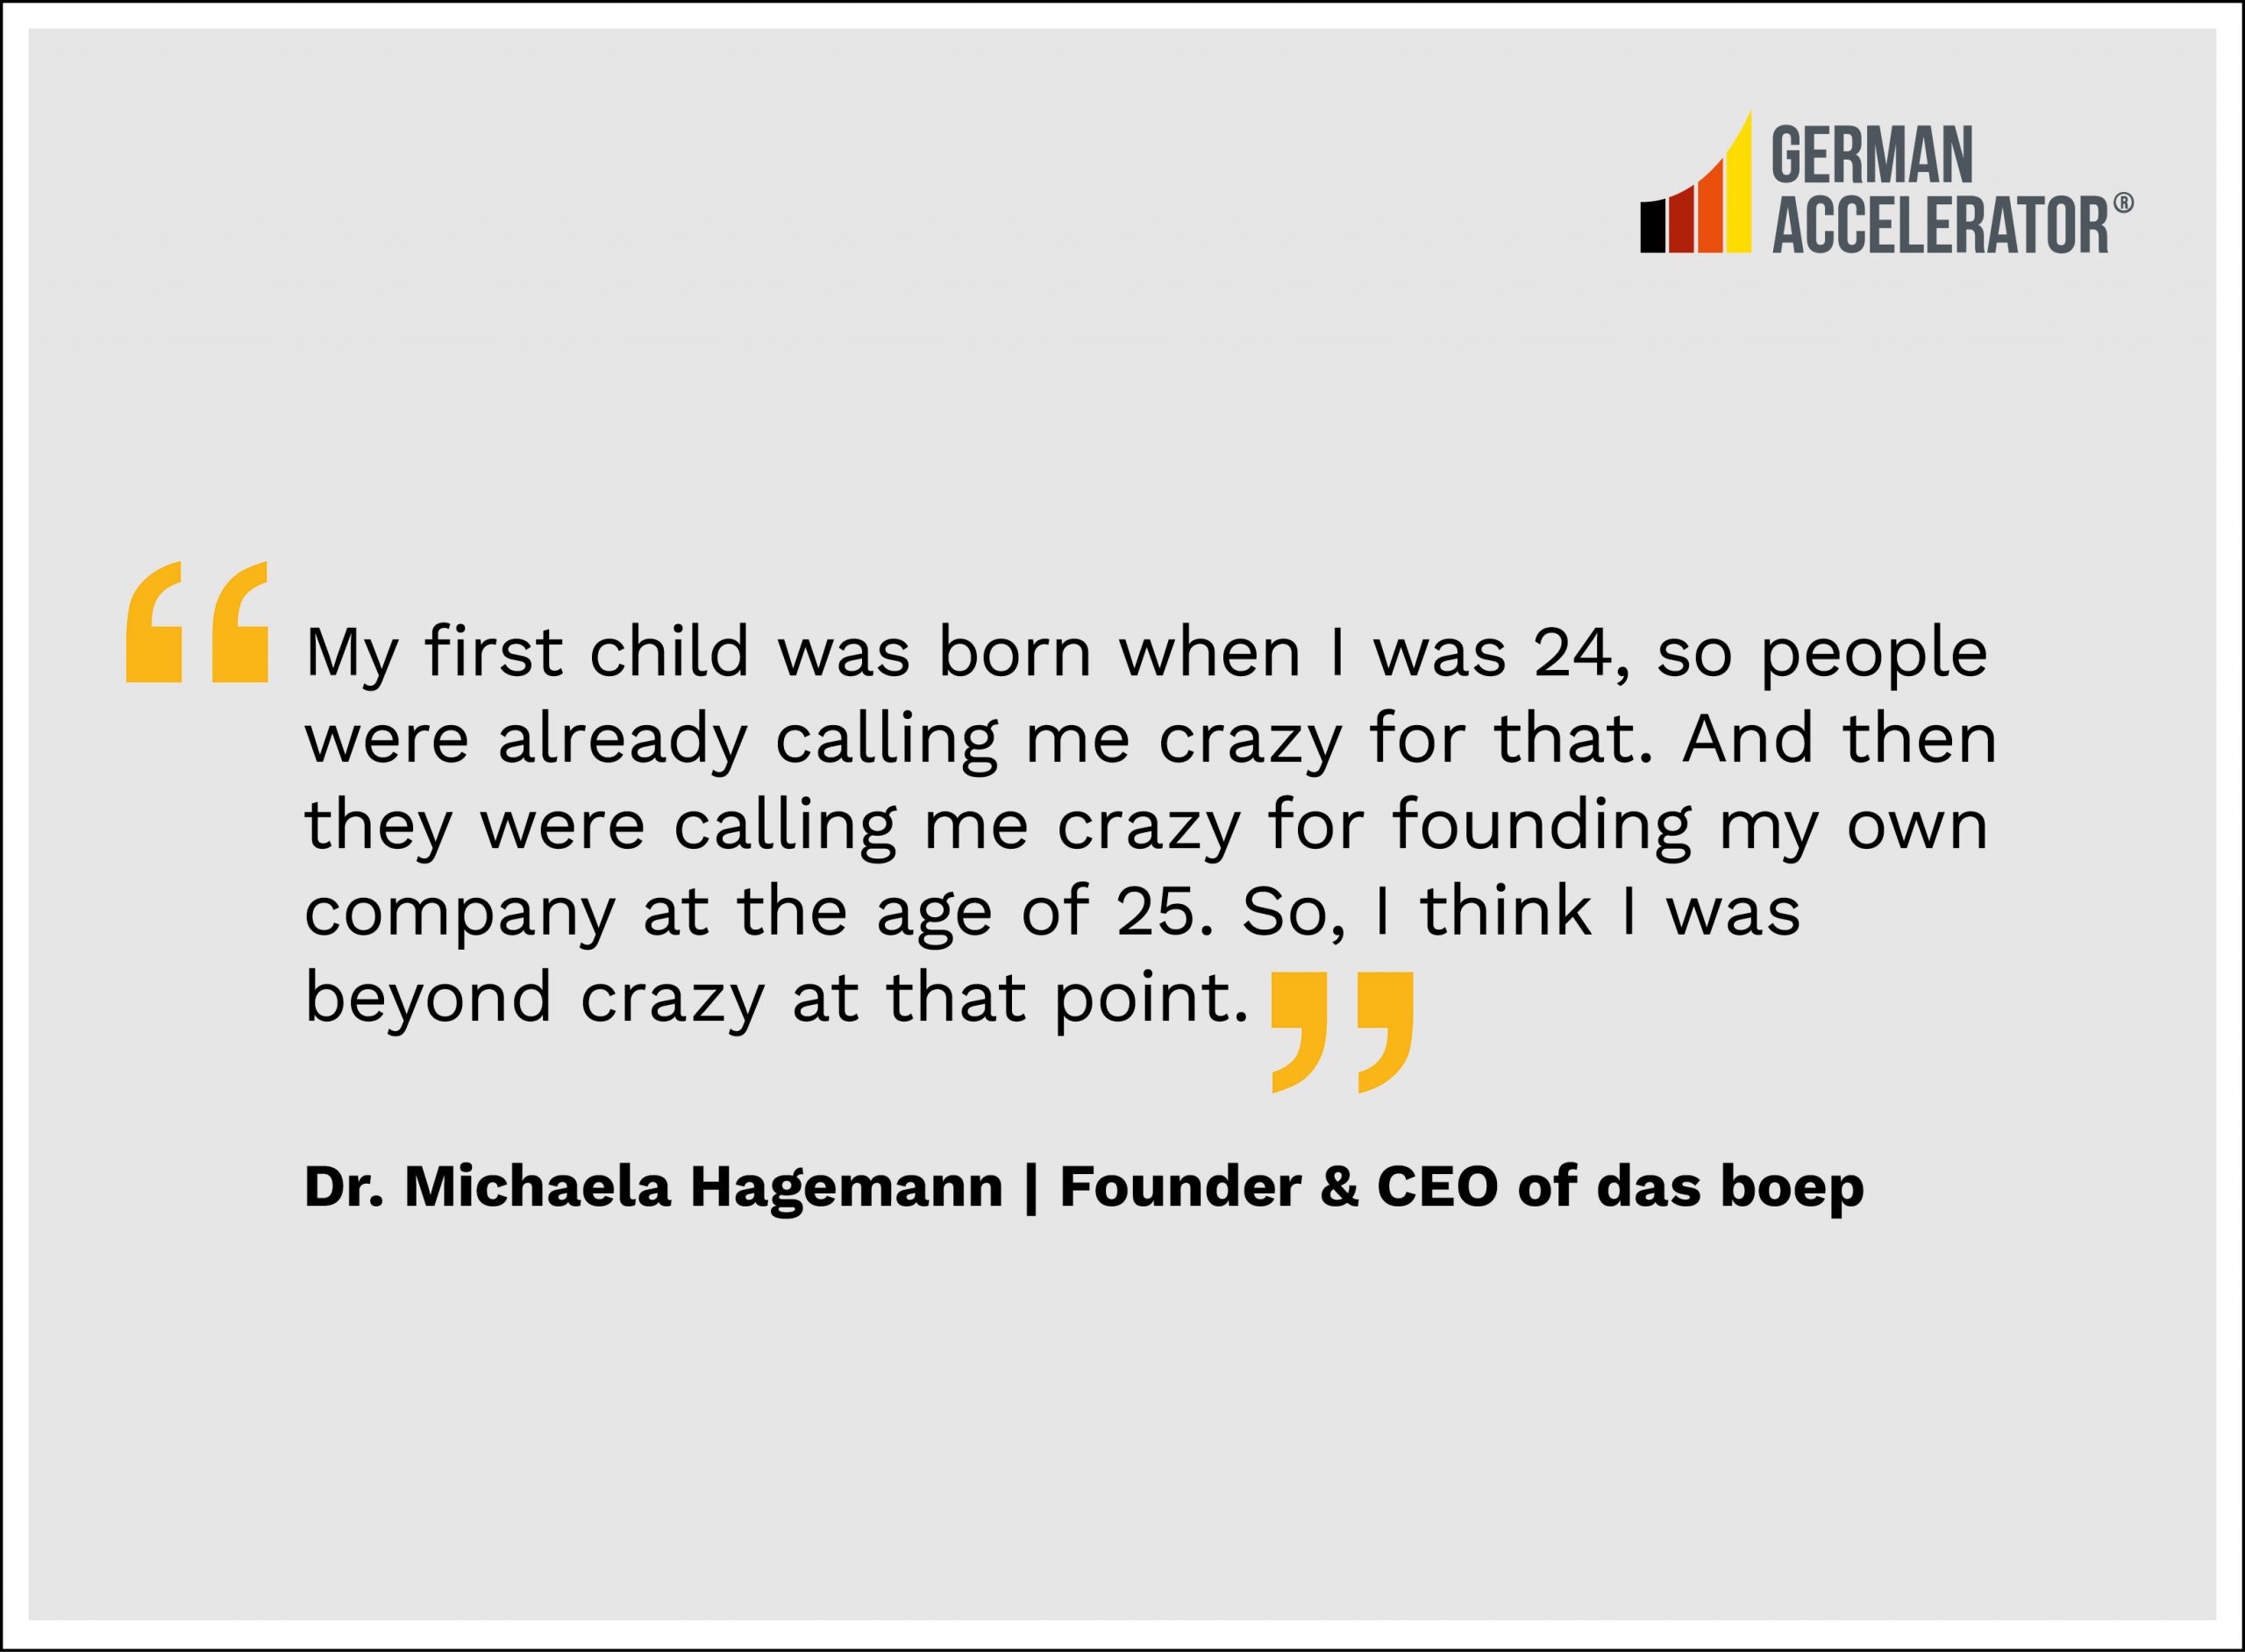 How Are Things? A Virtual Chat with Dr. Michaela Hagemann (Founder & CEO of ‘das boep’)